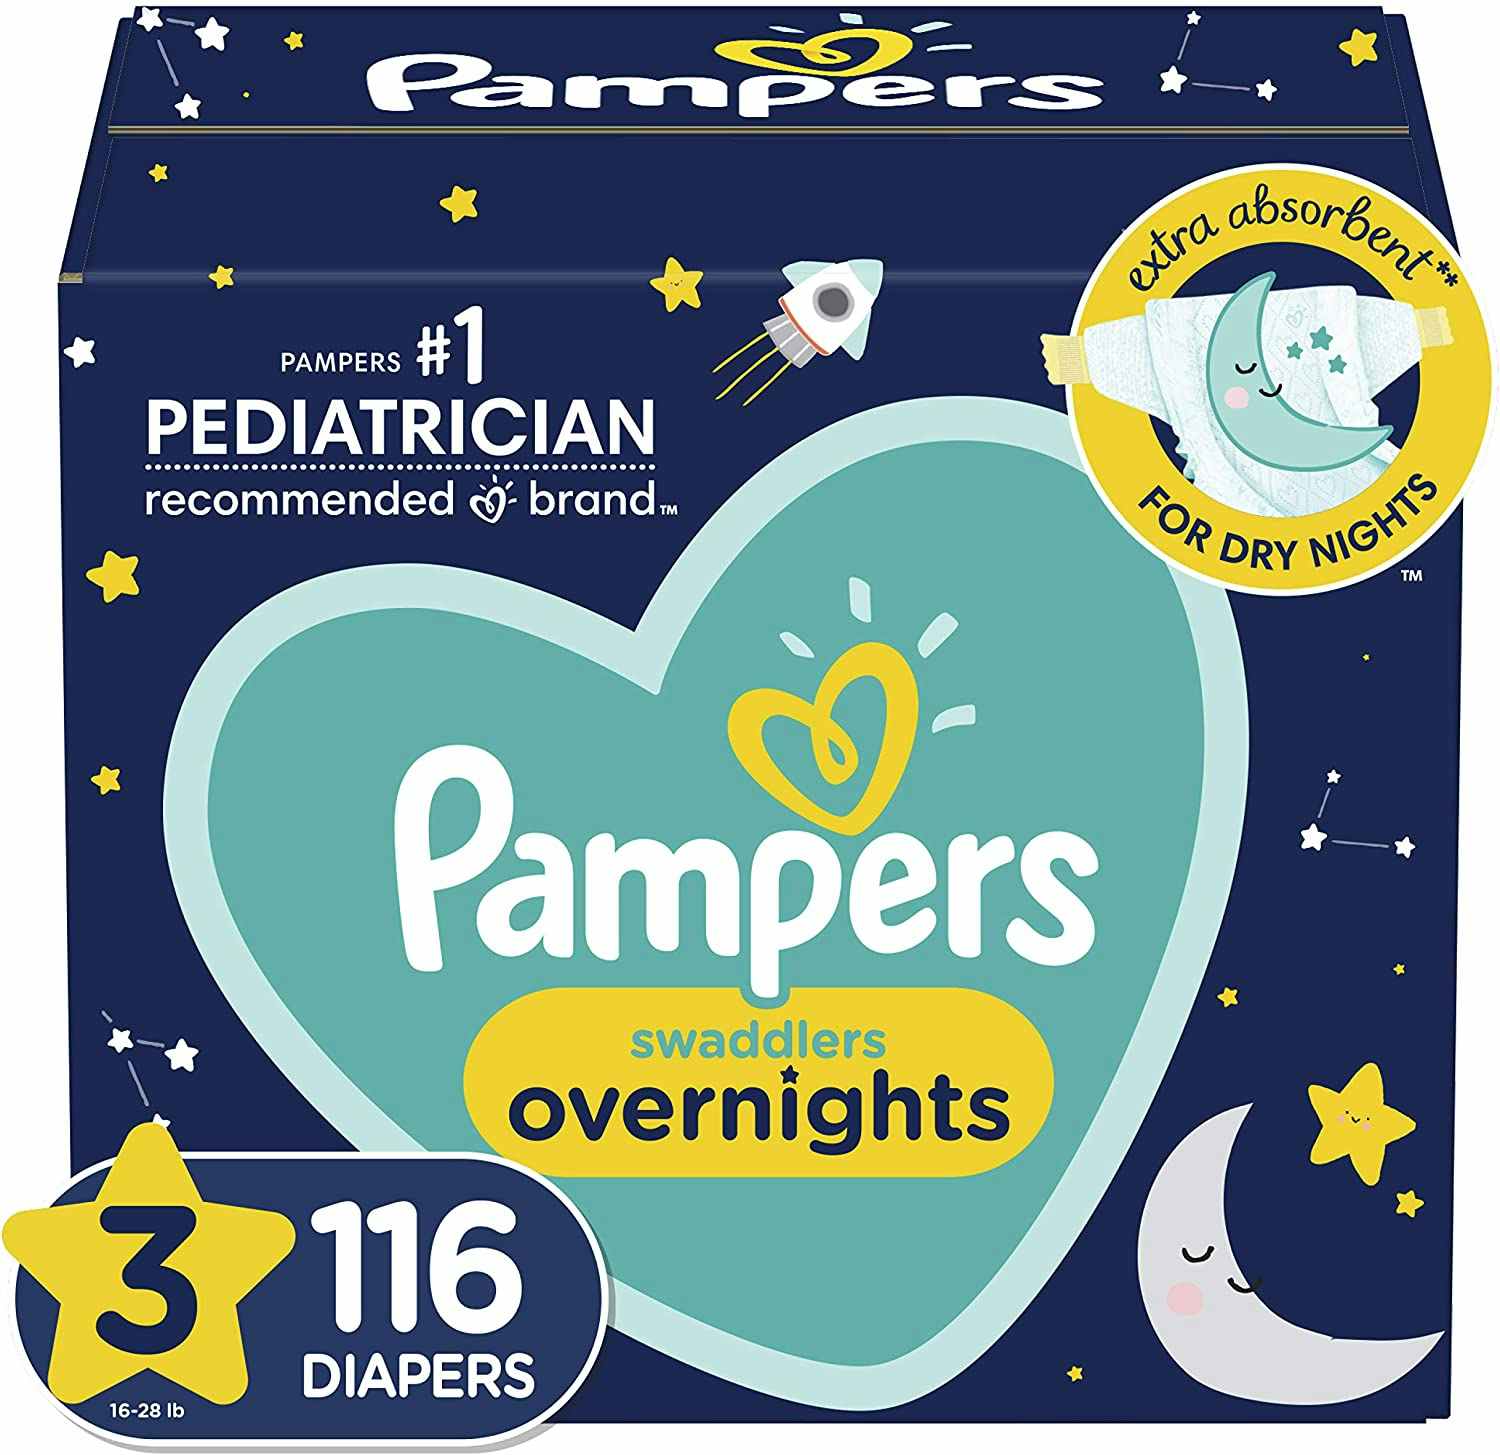 A box of Pampers Swaddlers Overnights diapers.